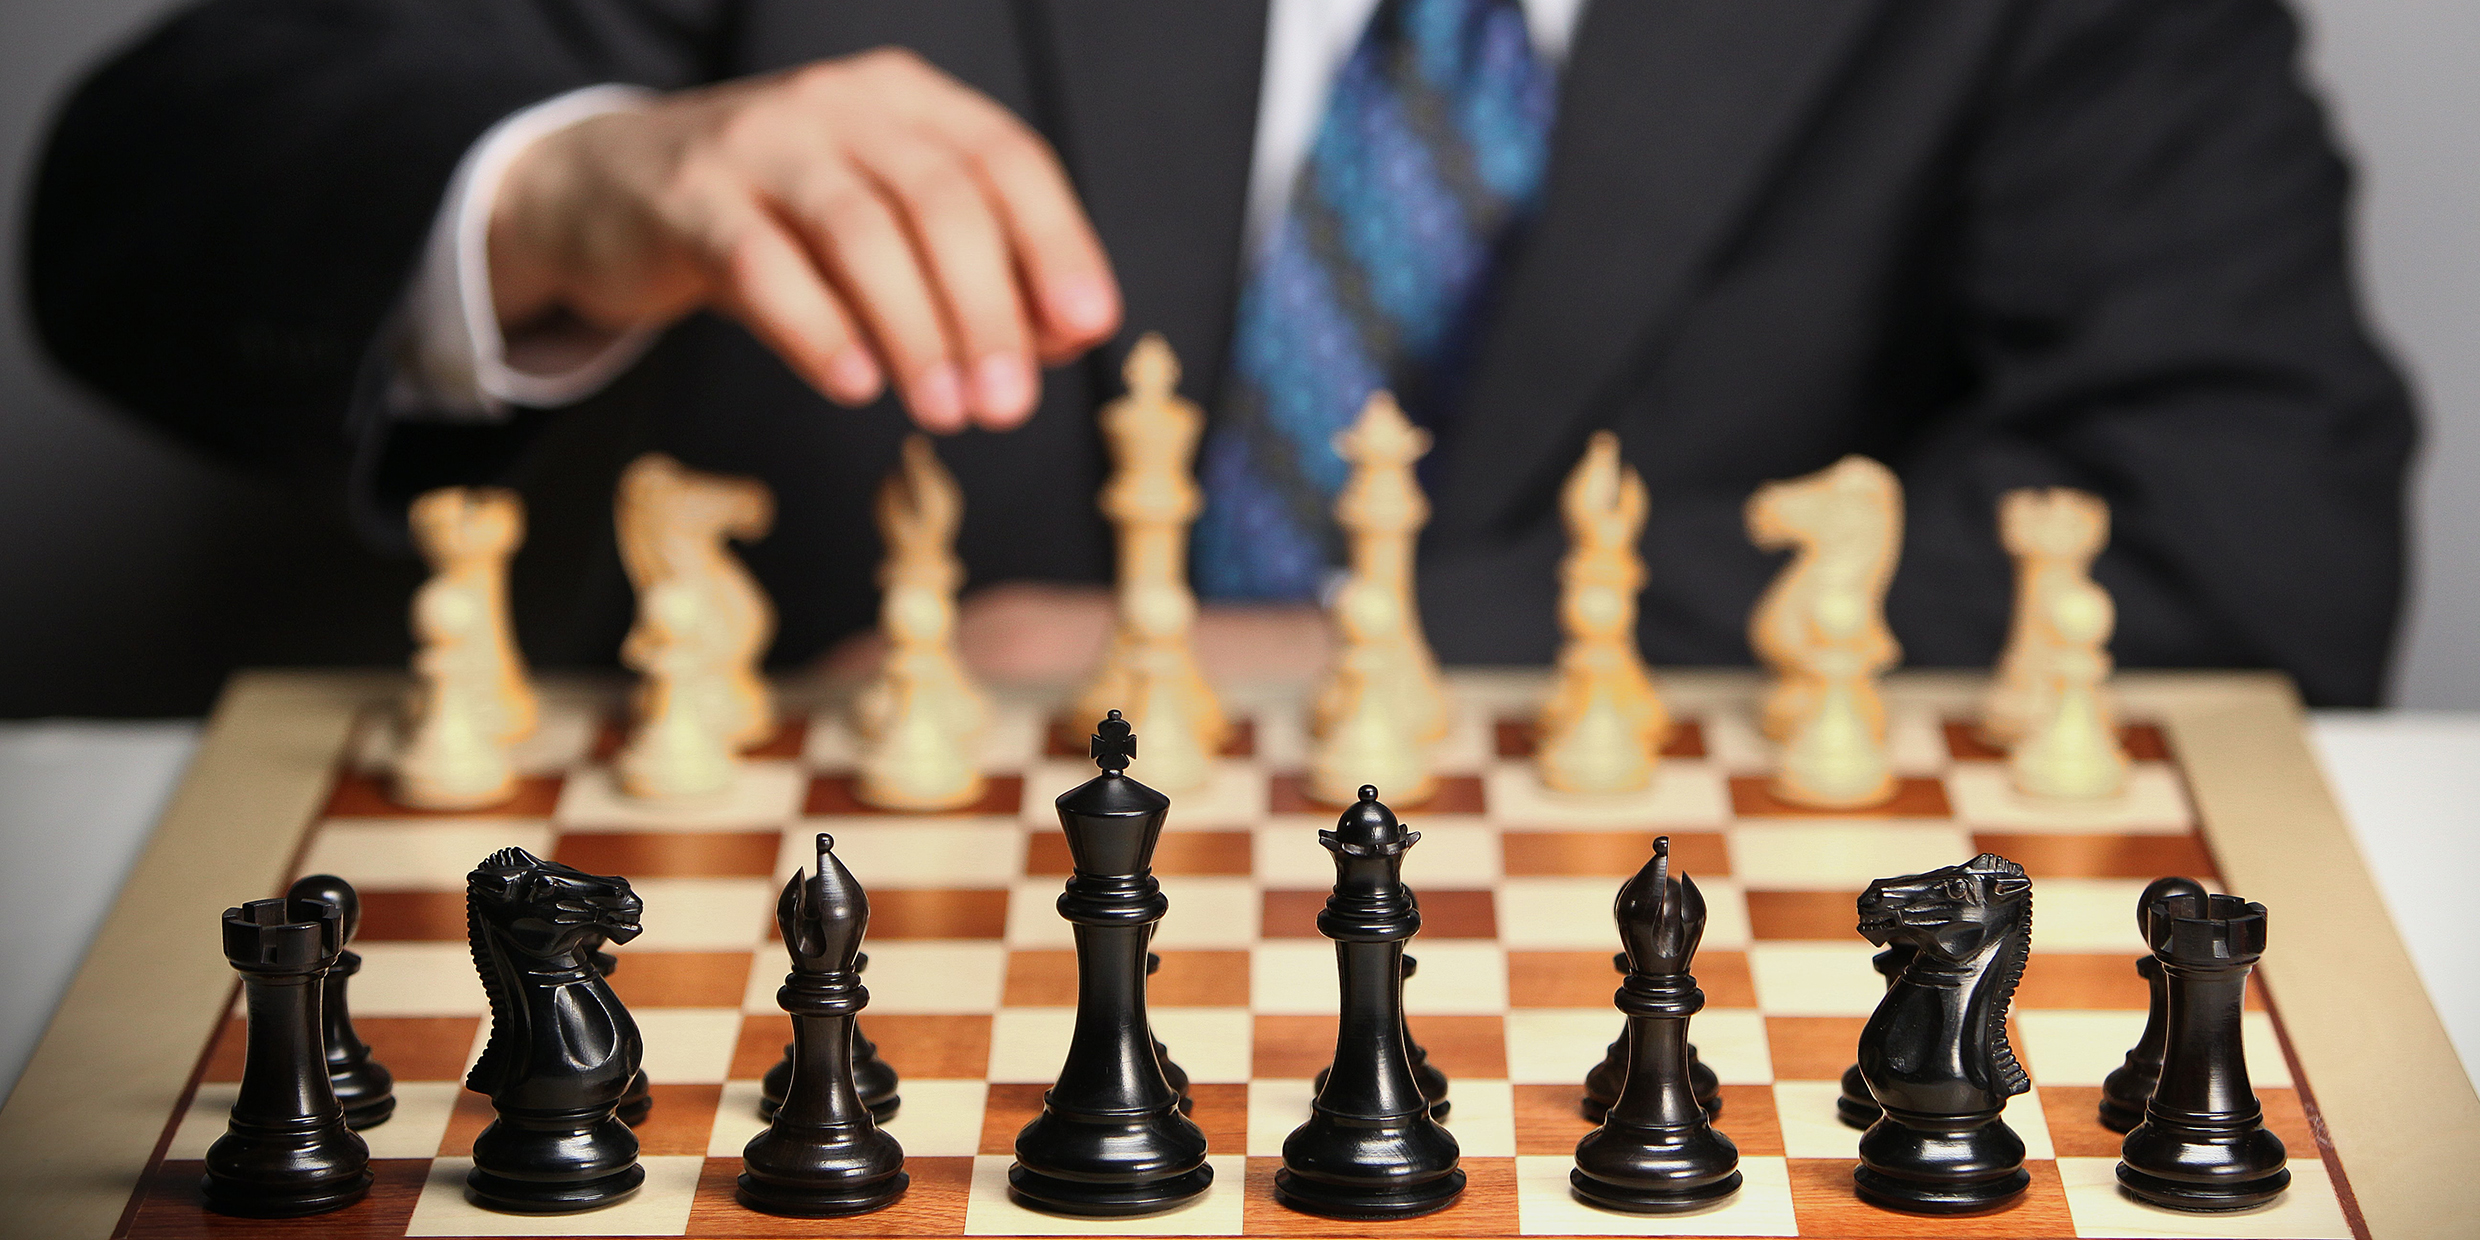 Image of man in suit making opening move at a chess board